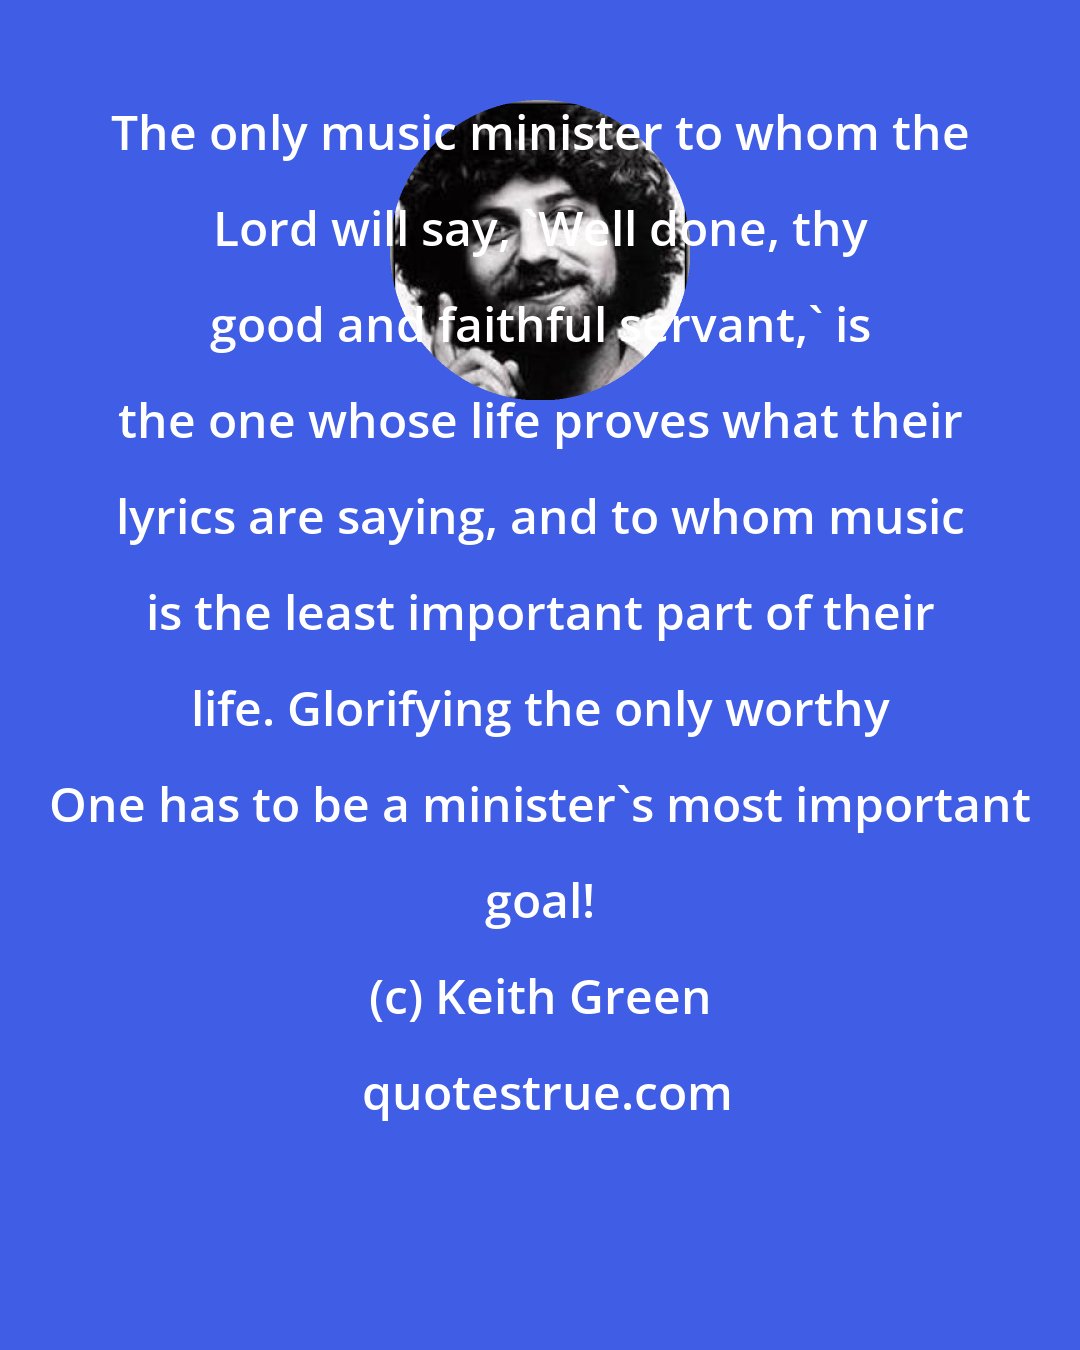 Keith Green: The only music minister to whom the Lord will say, 'Well done, thy good and faithful servant,' is the one whose life proves what their lyrics are saying, and to whom music is the least important part of their life. Glorifying the only worthy One has to be a minister's most important goal!